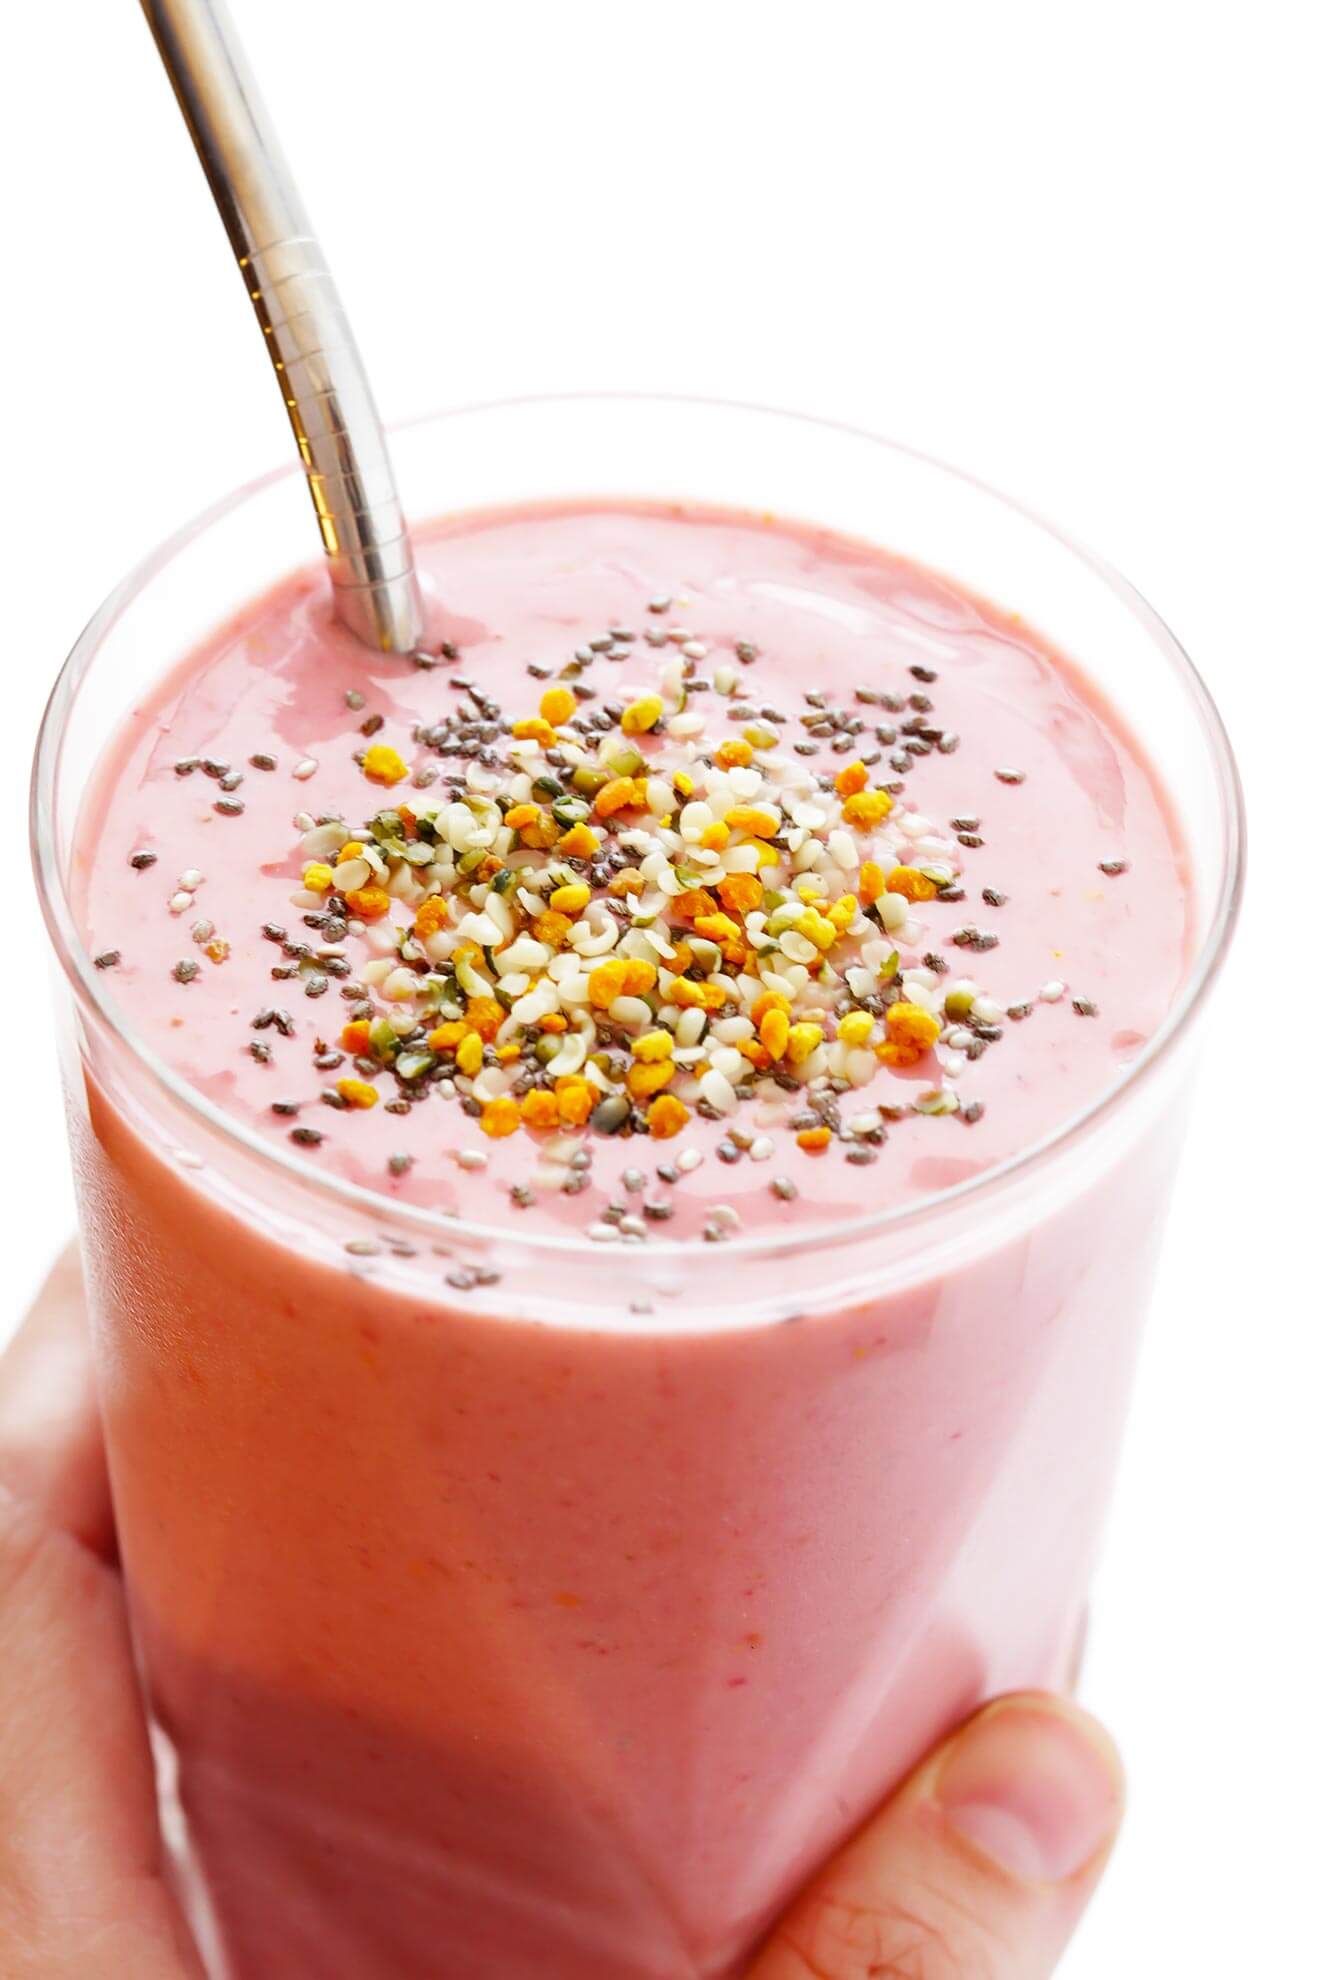 This delicious Creamy Raspberry Protein Smoothie is full of feel-good ingredients, and only takes a few minutes to make! | gimmesomeoven.com